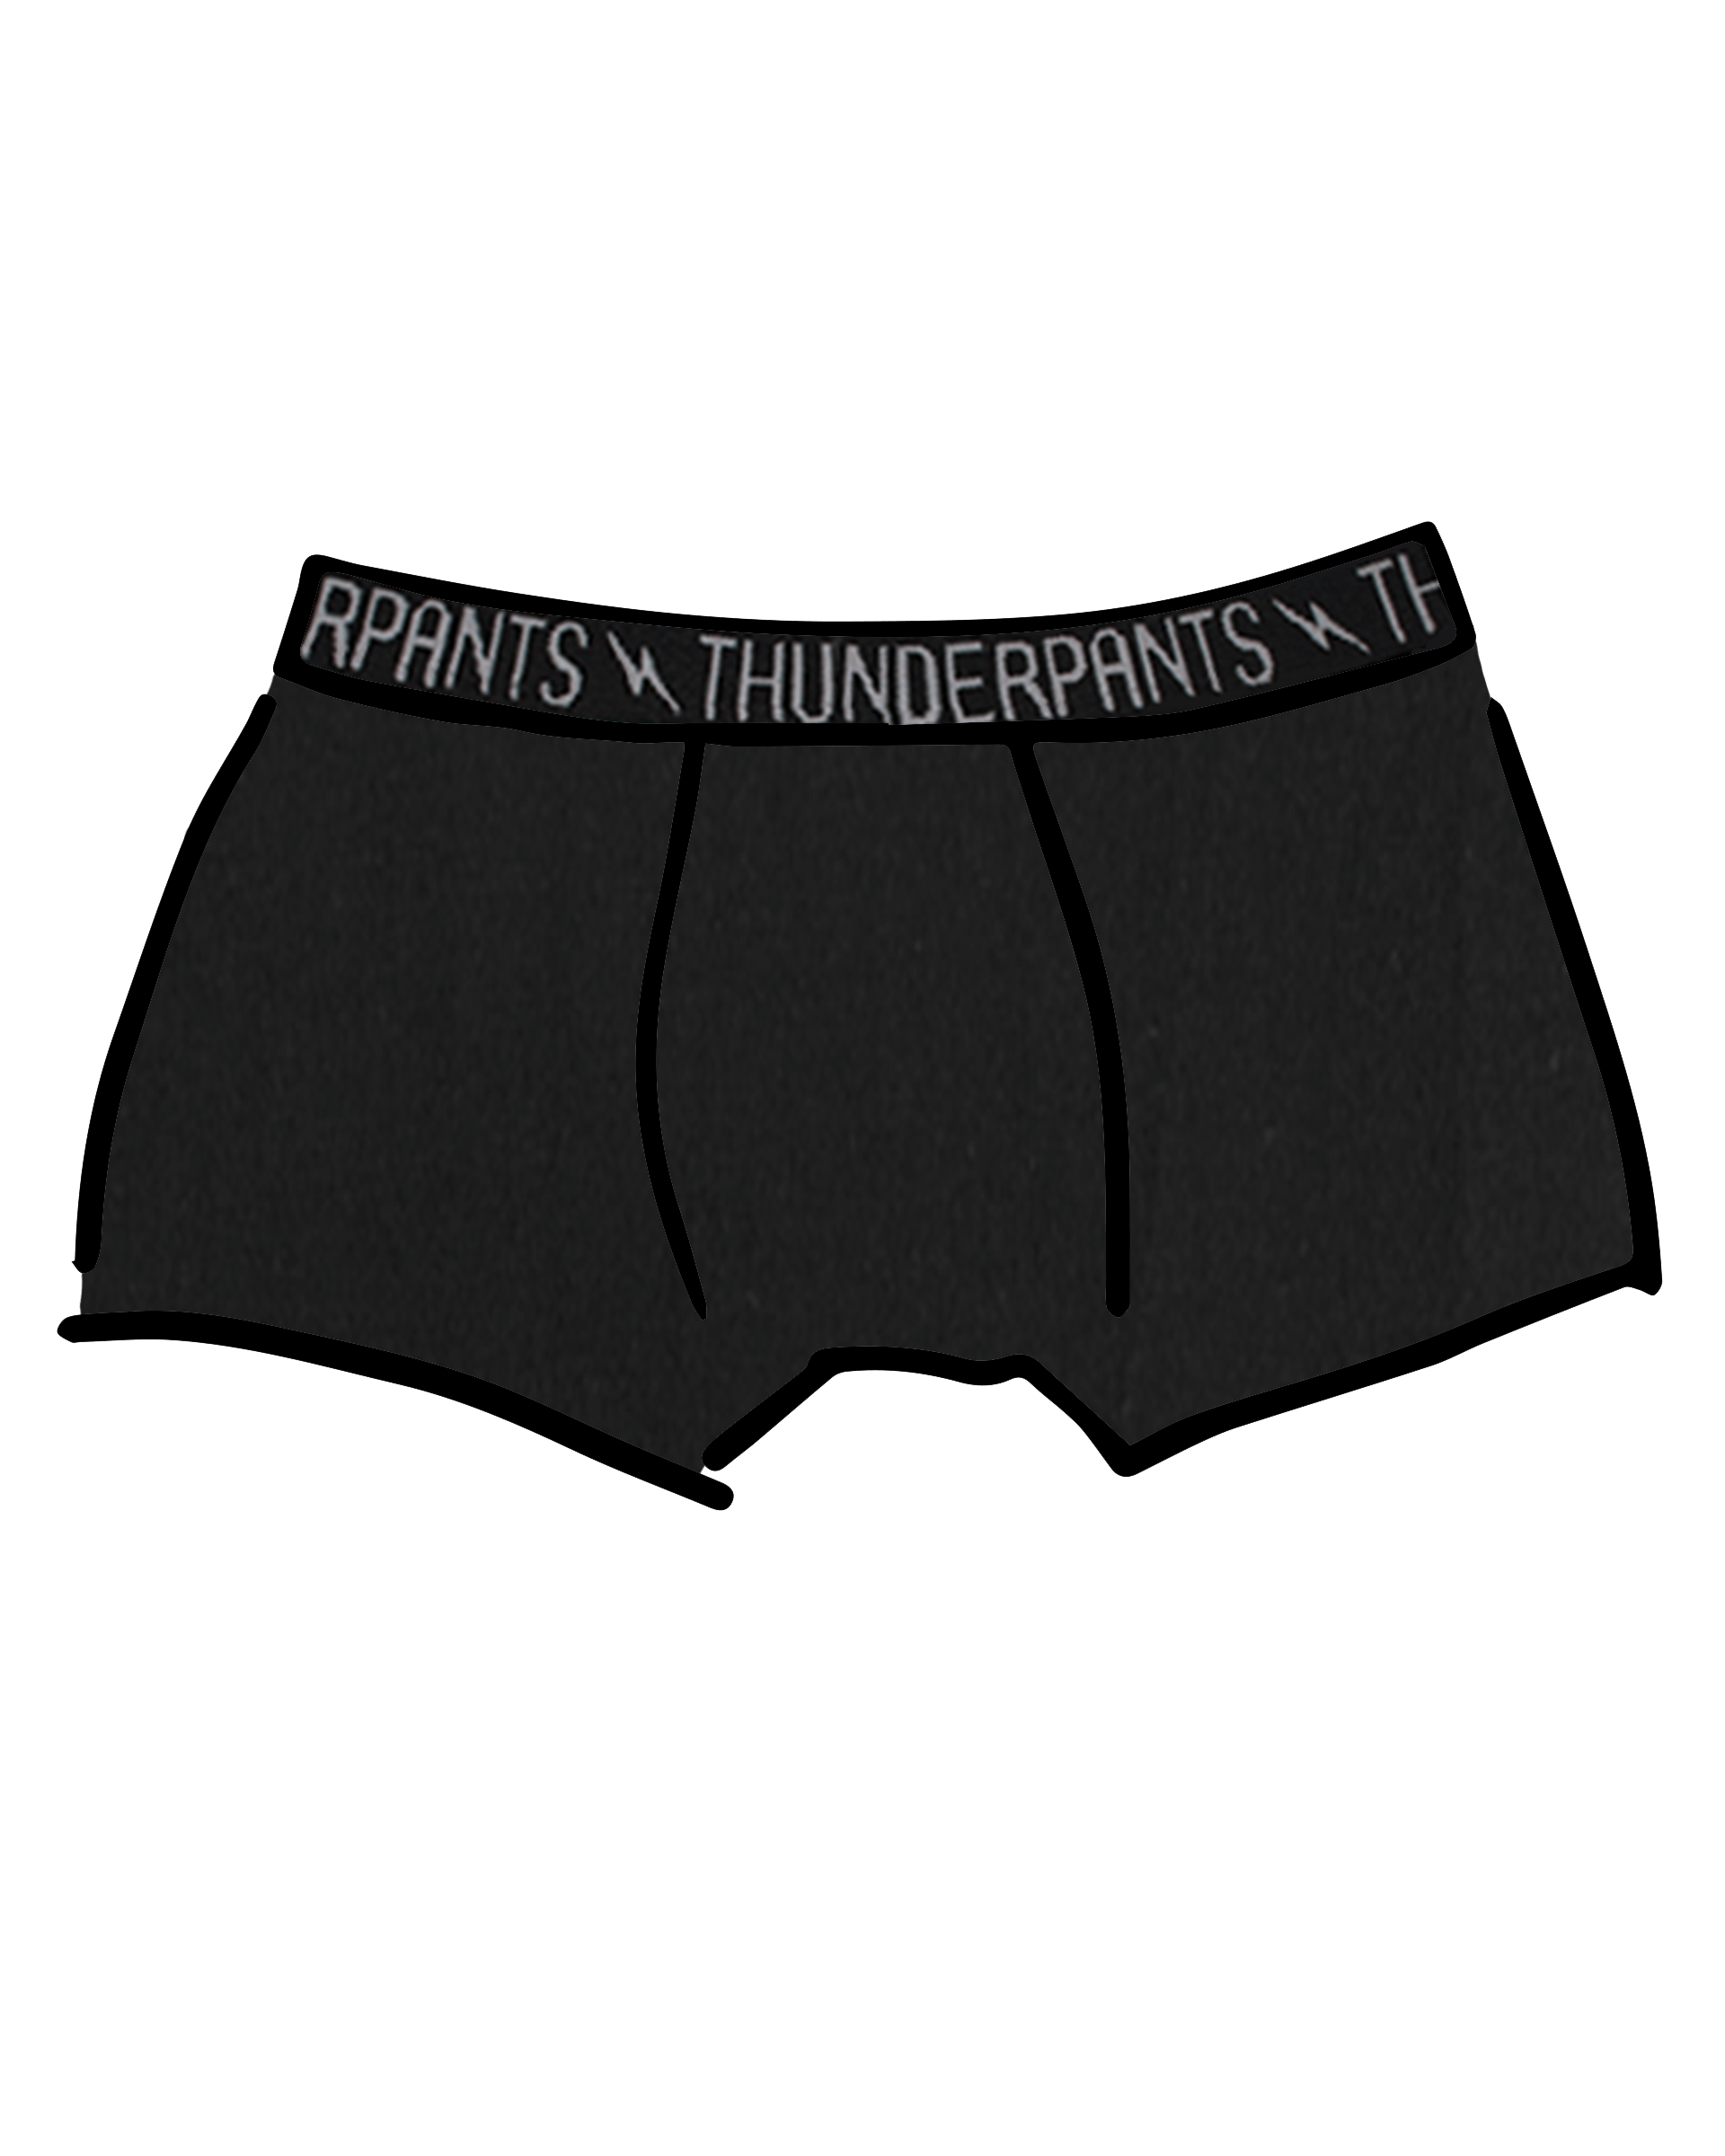 Drawing of Thunderpants Boxer Brief style underwear in Plain Black.